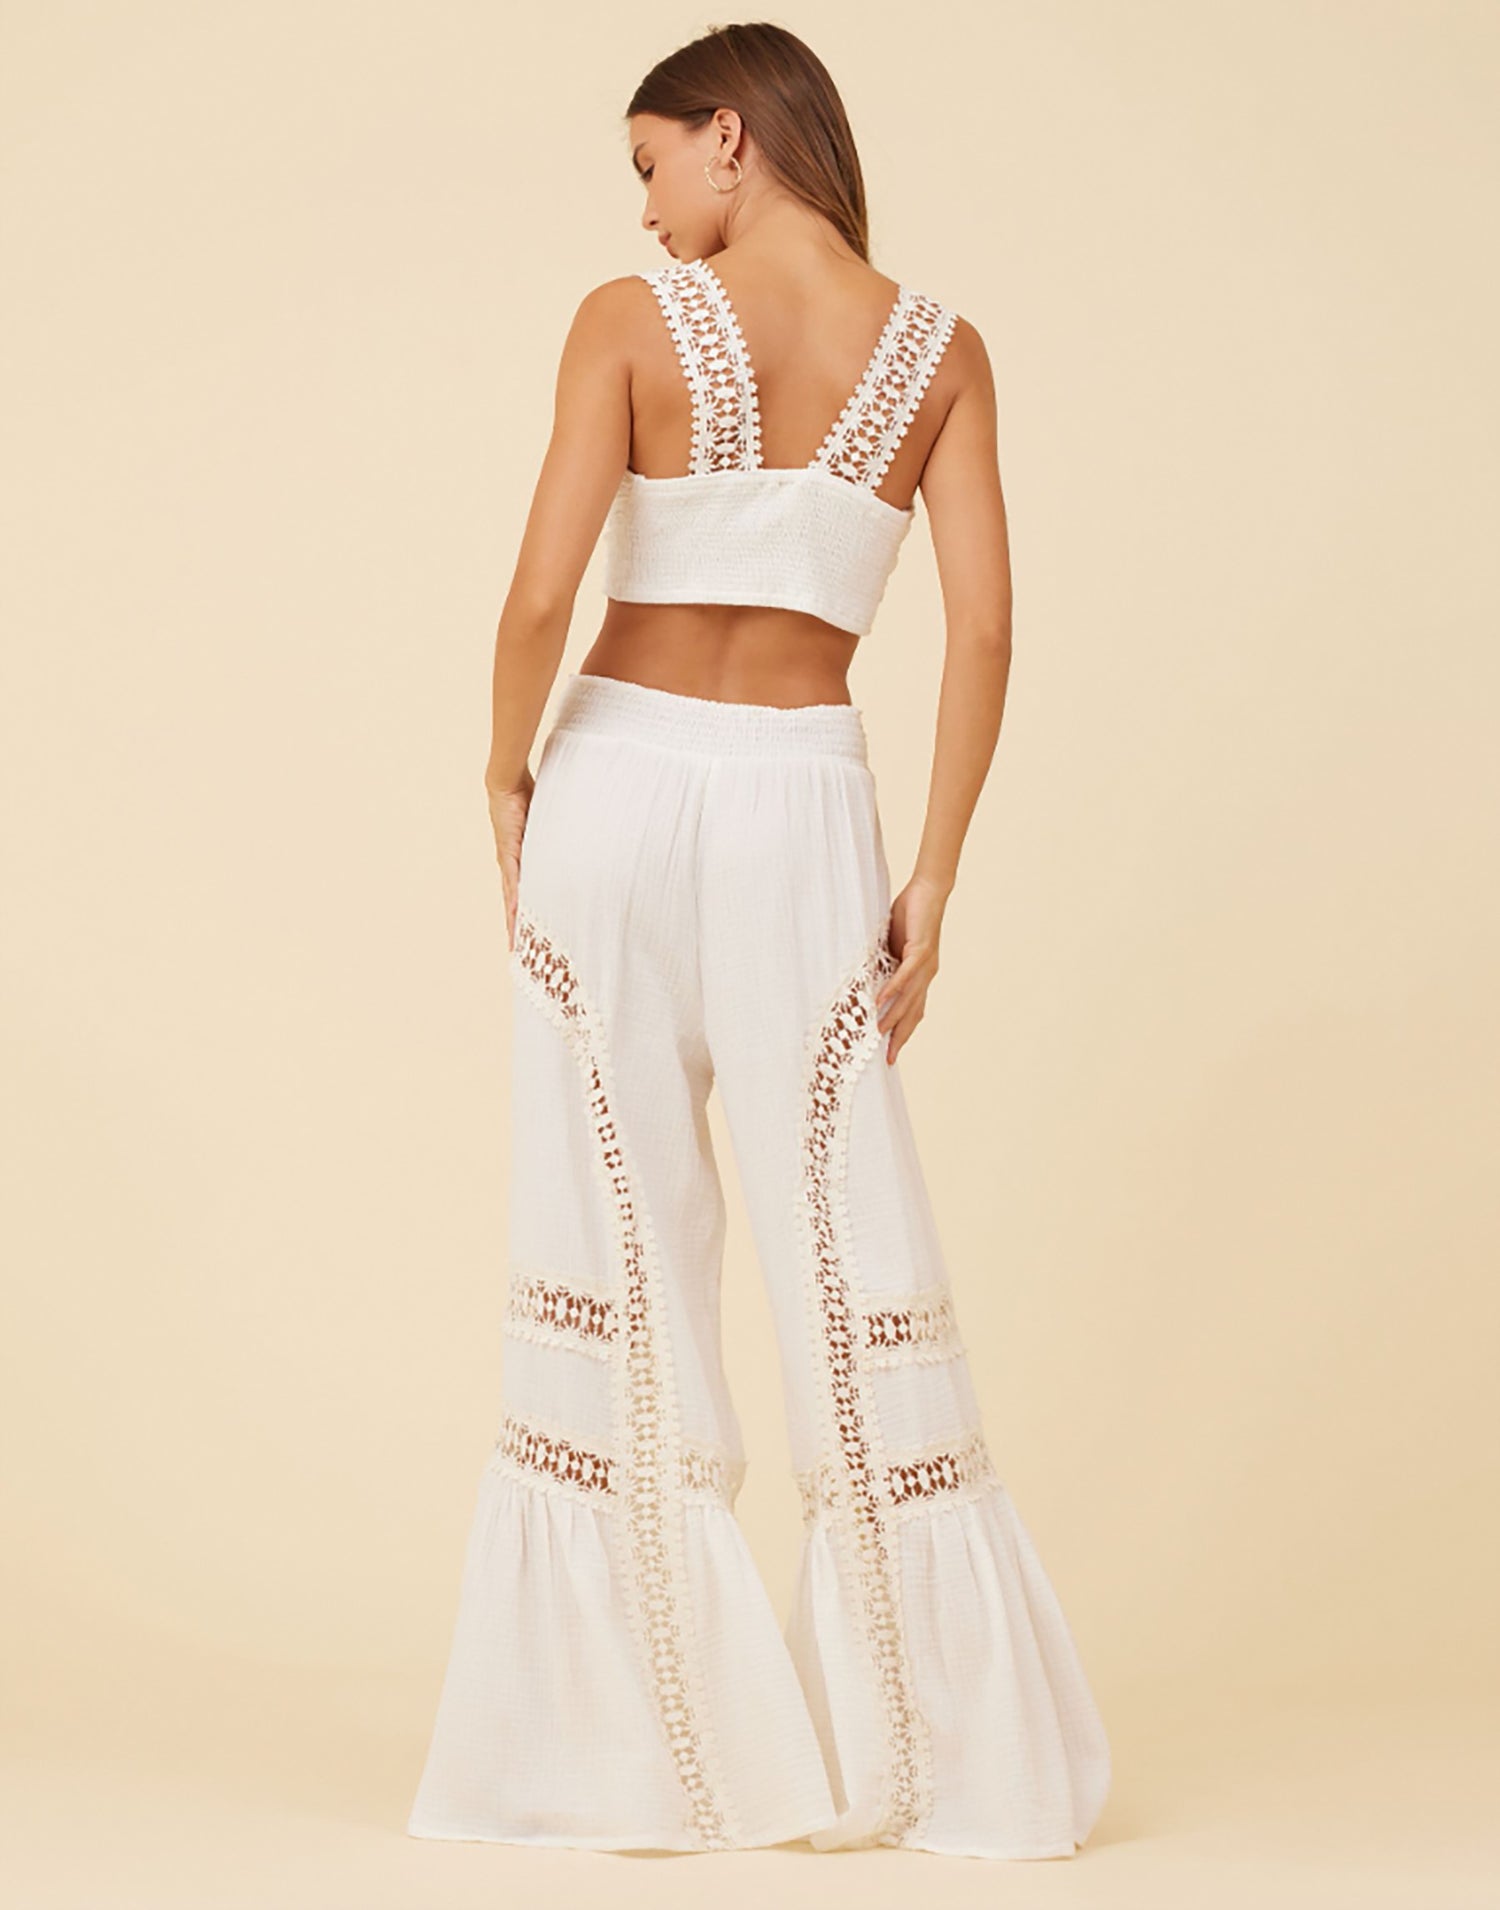 Gauze with Crochet Trim Tie Front Crop Top by Surf Gypsy in White - Back View